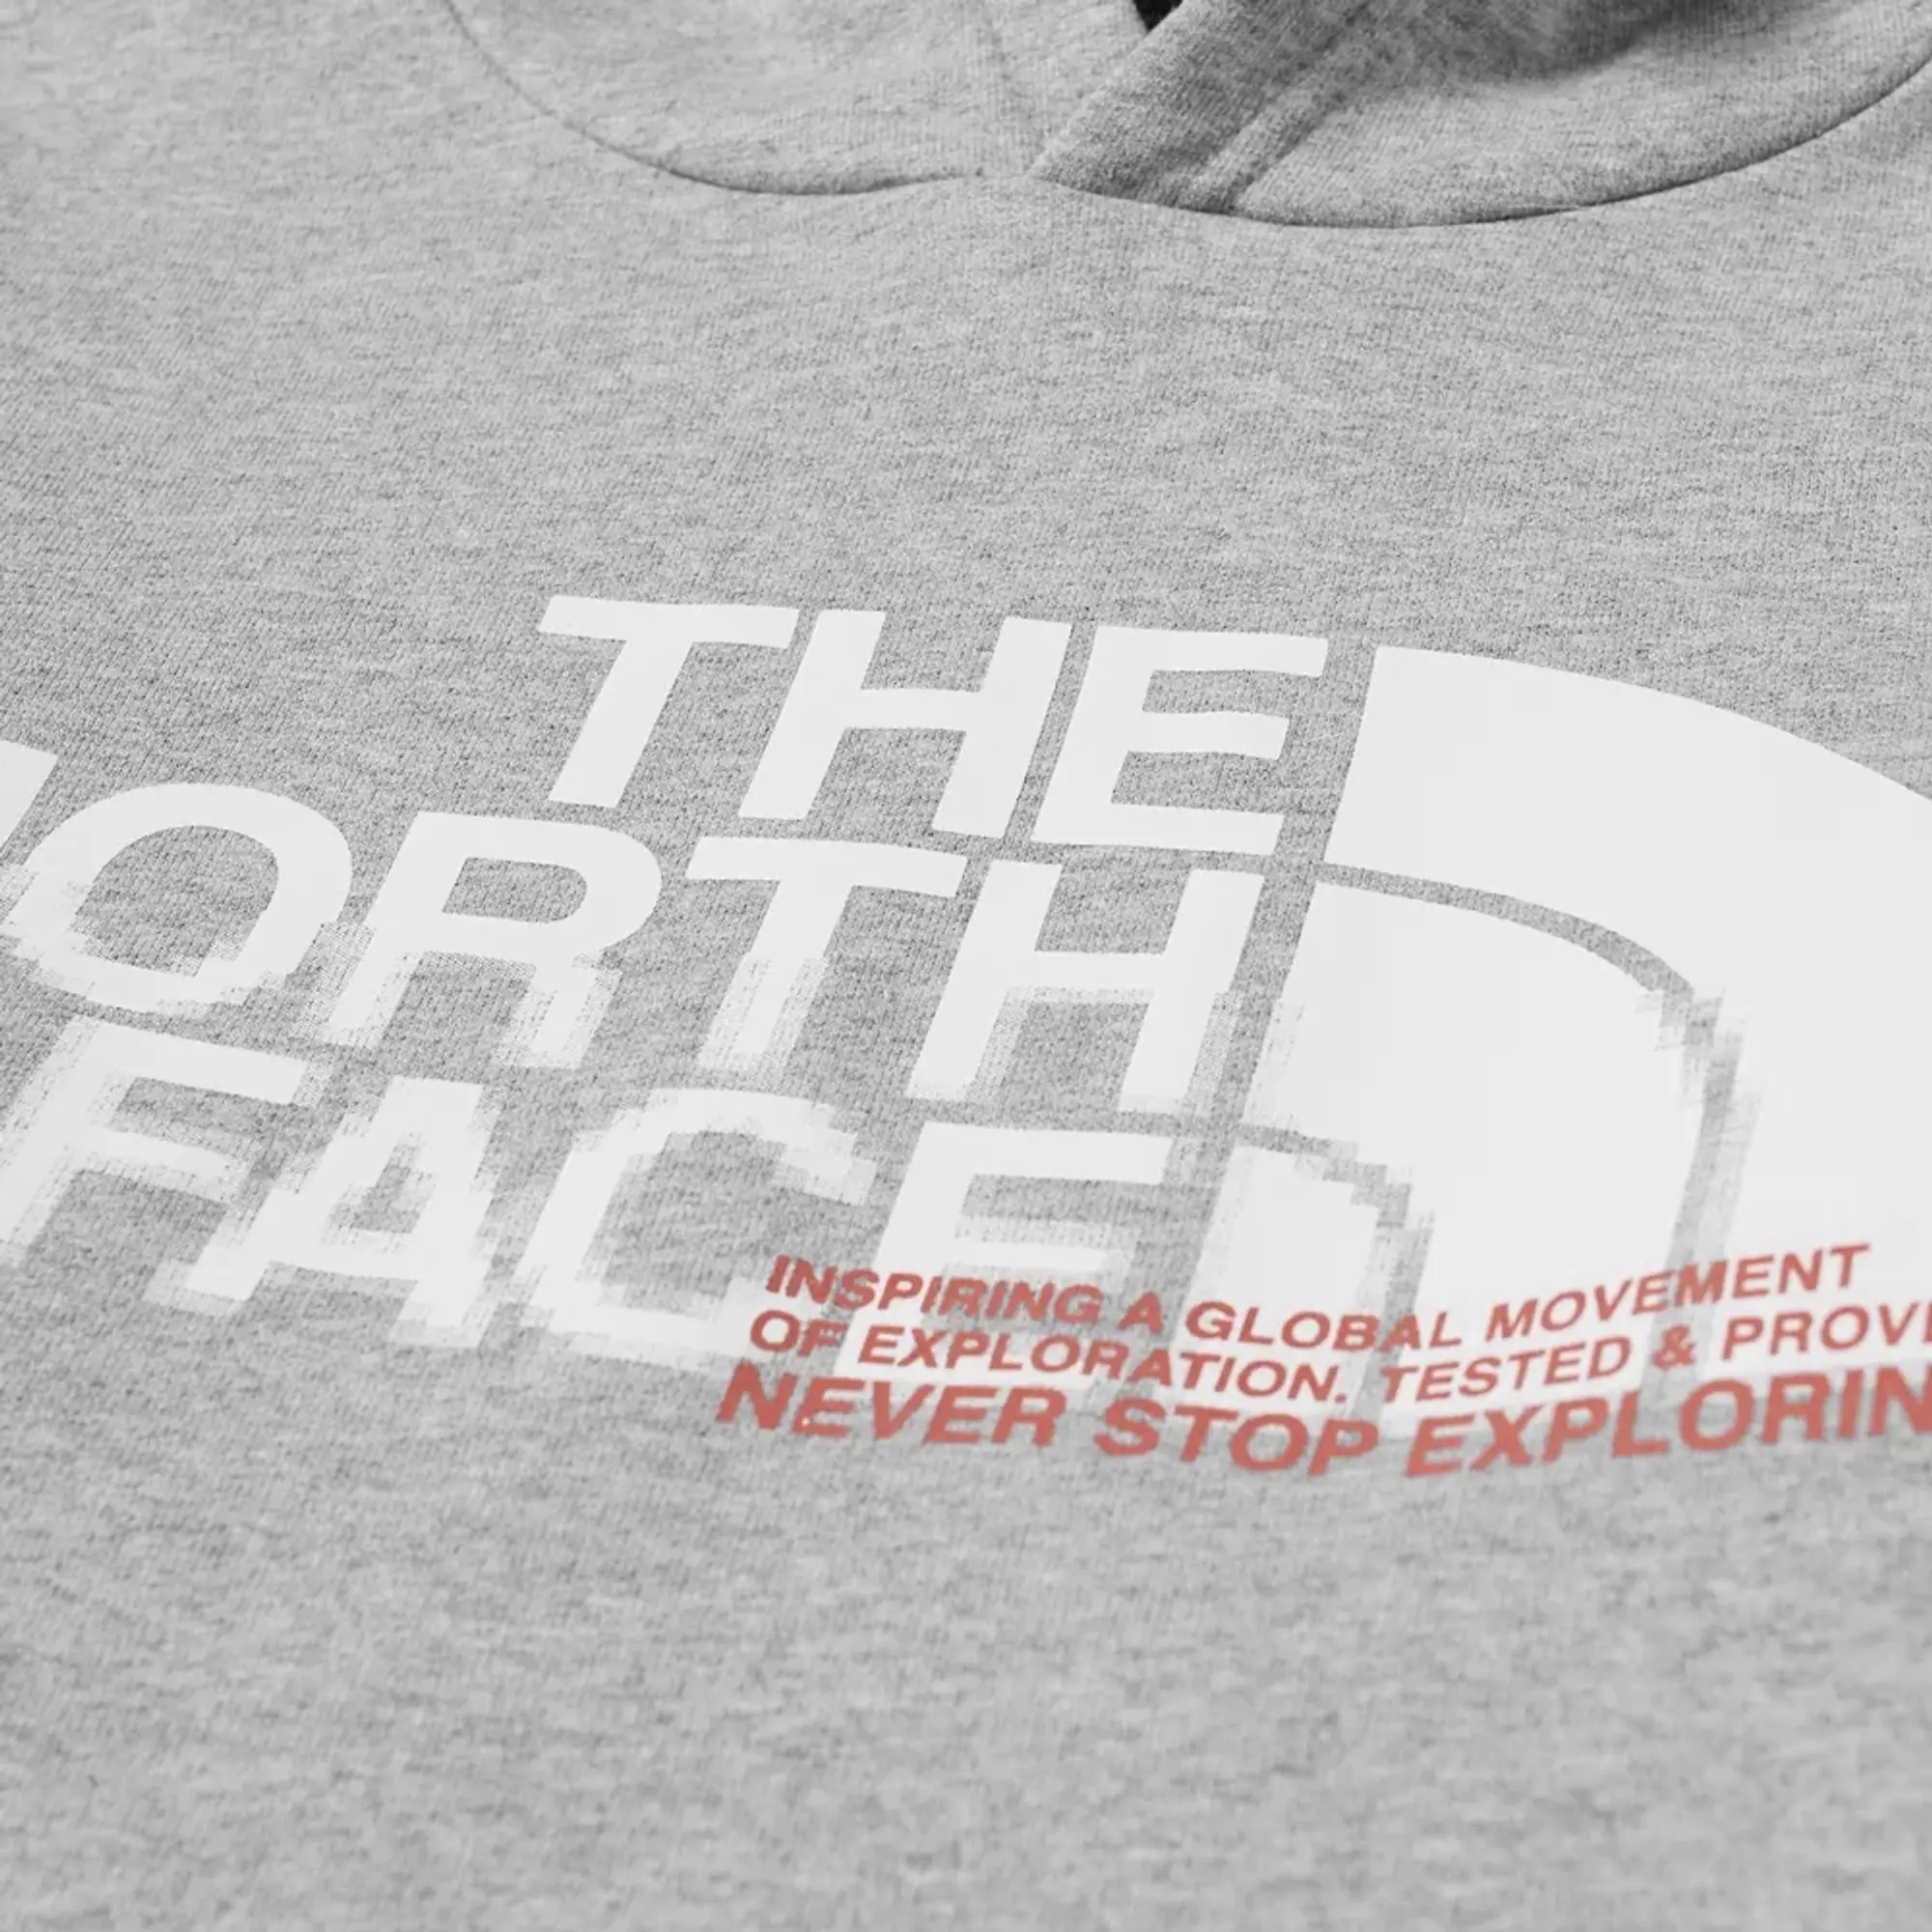 The North Face Coordinates Popover Hoody www.krzysztofbialy.com